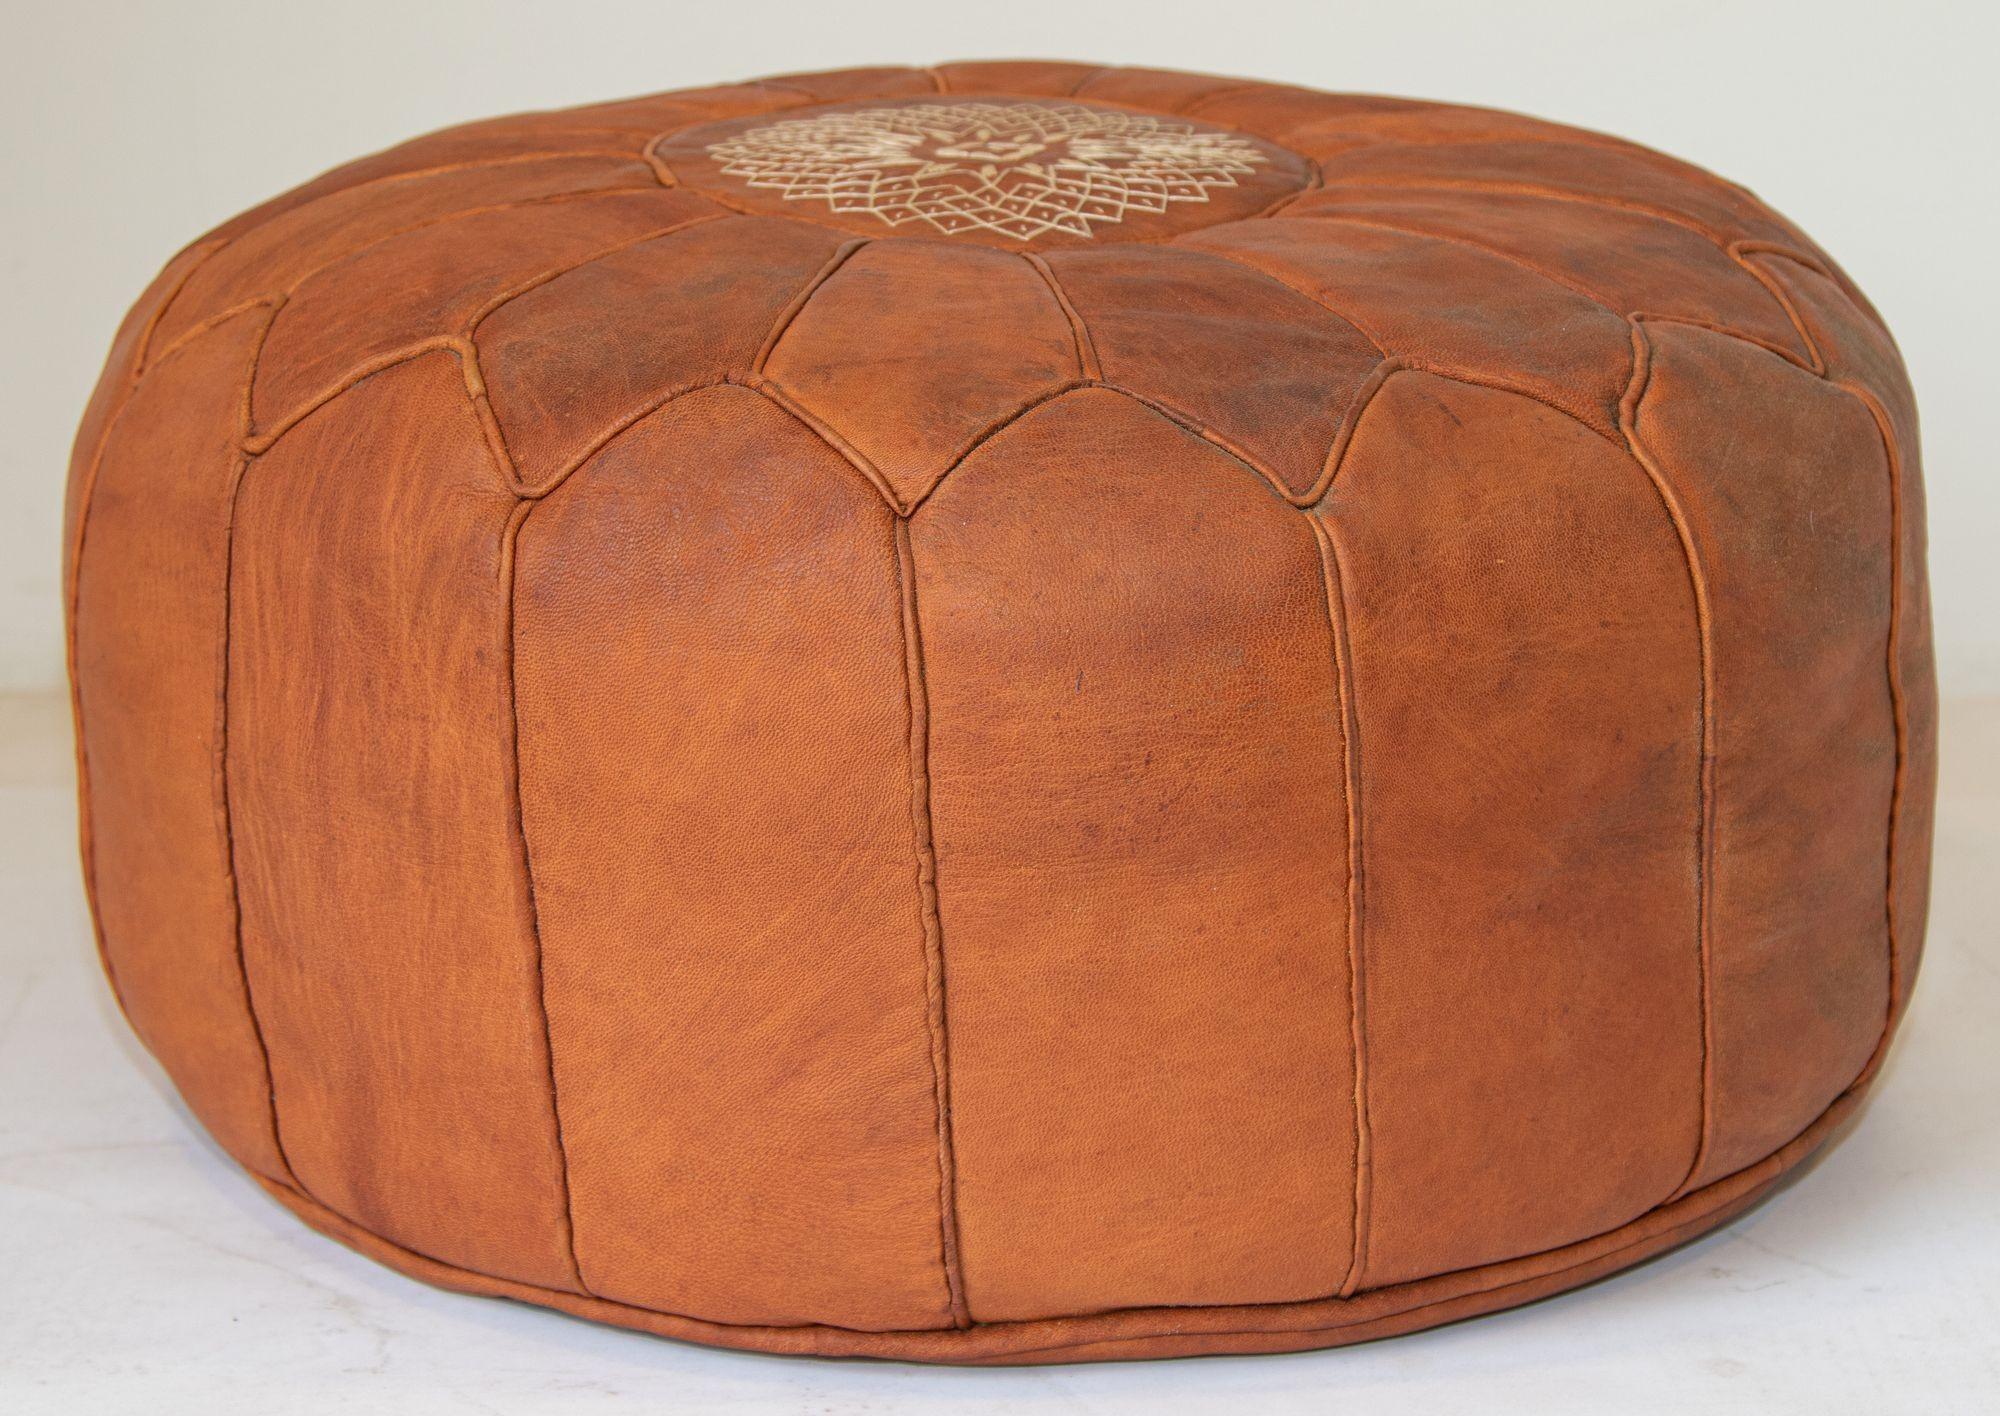 Vintage Moroccan brown leather pouf.
Large vintage round Moroccan leather pouf, handcrafted in brown camel leather.
Hand tooled Moroccan leather ottoman embroidered on top with a Moorish design by Moroccan artisans in Marrakech.
Multiple